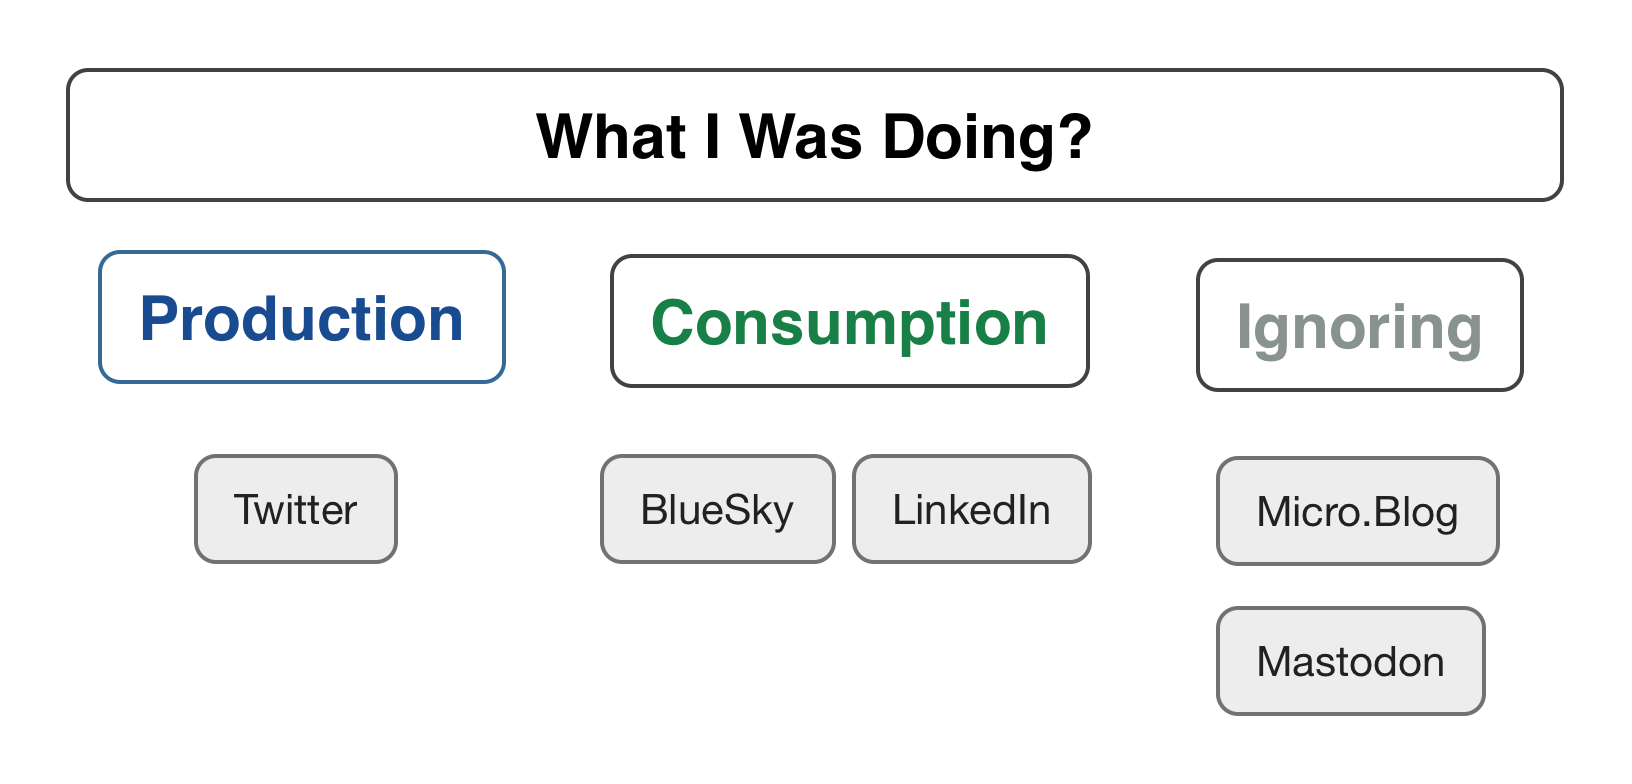 Chart of my social media user based on previous consumption and production 